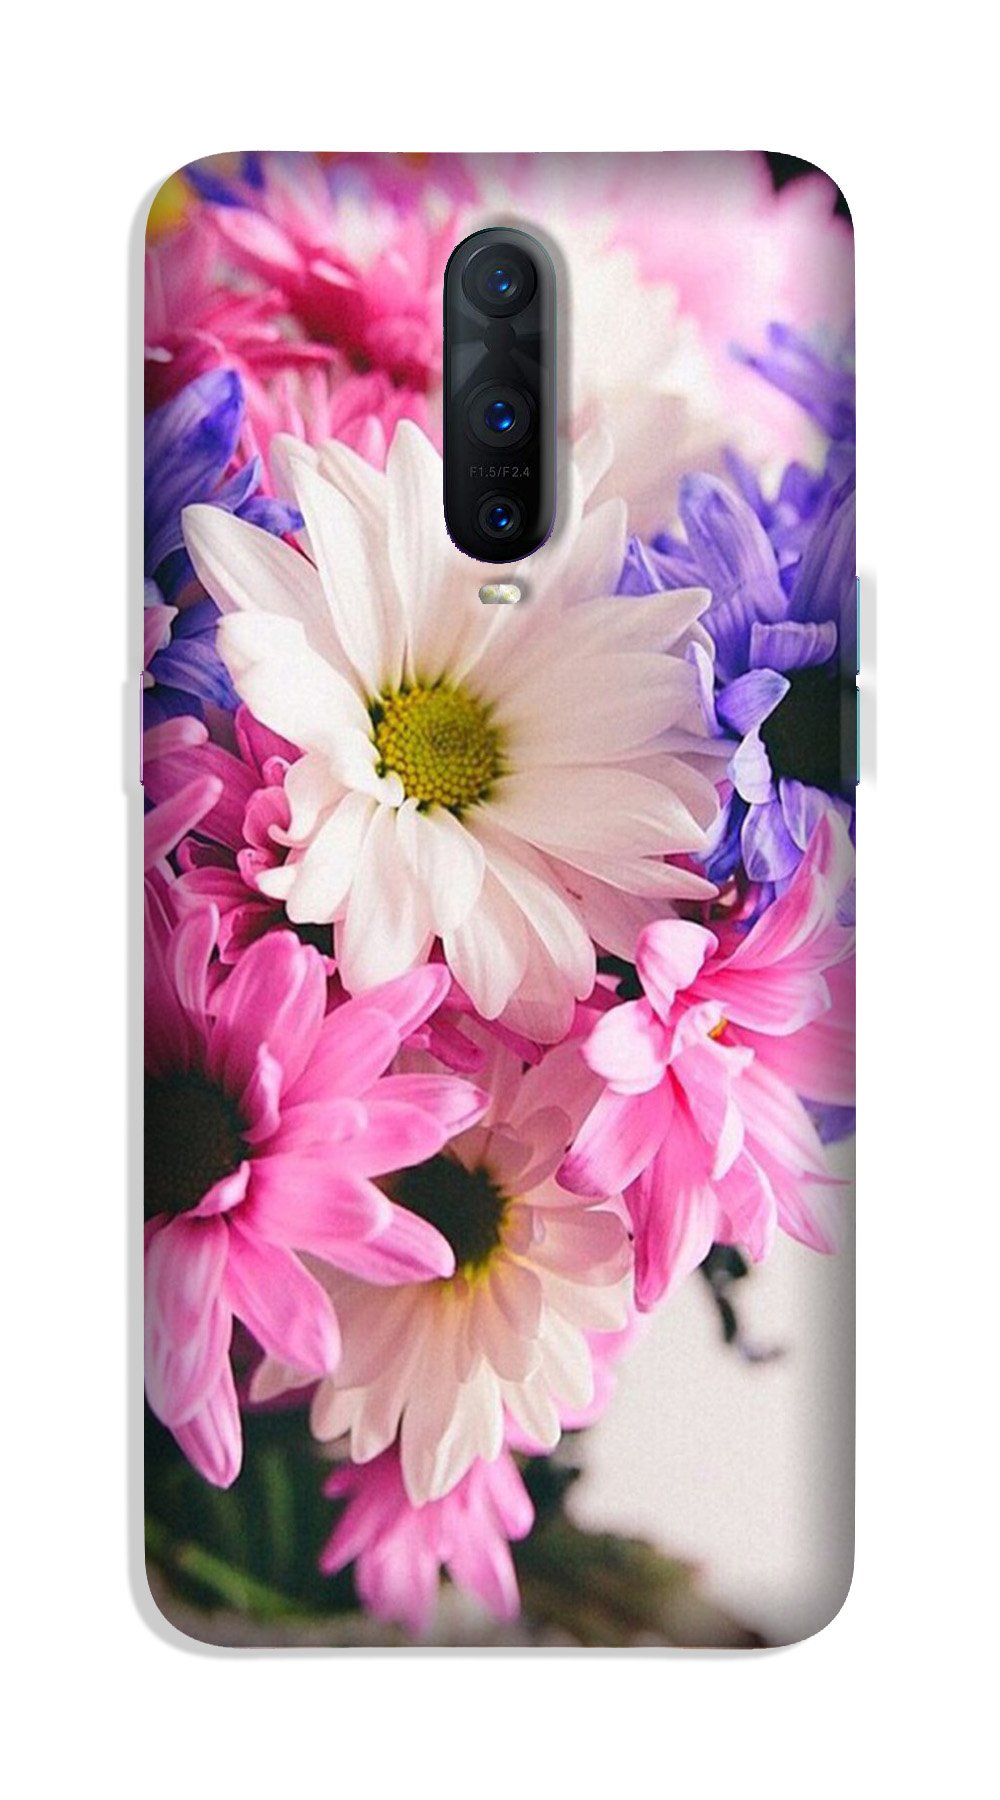 Coloful Daisy Case for OnePlus 7 Pro